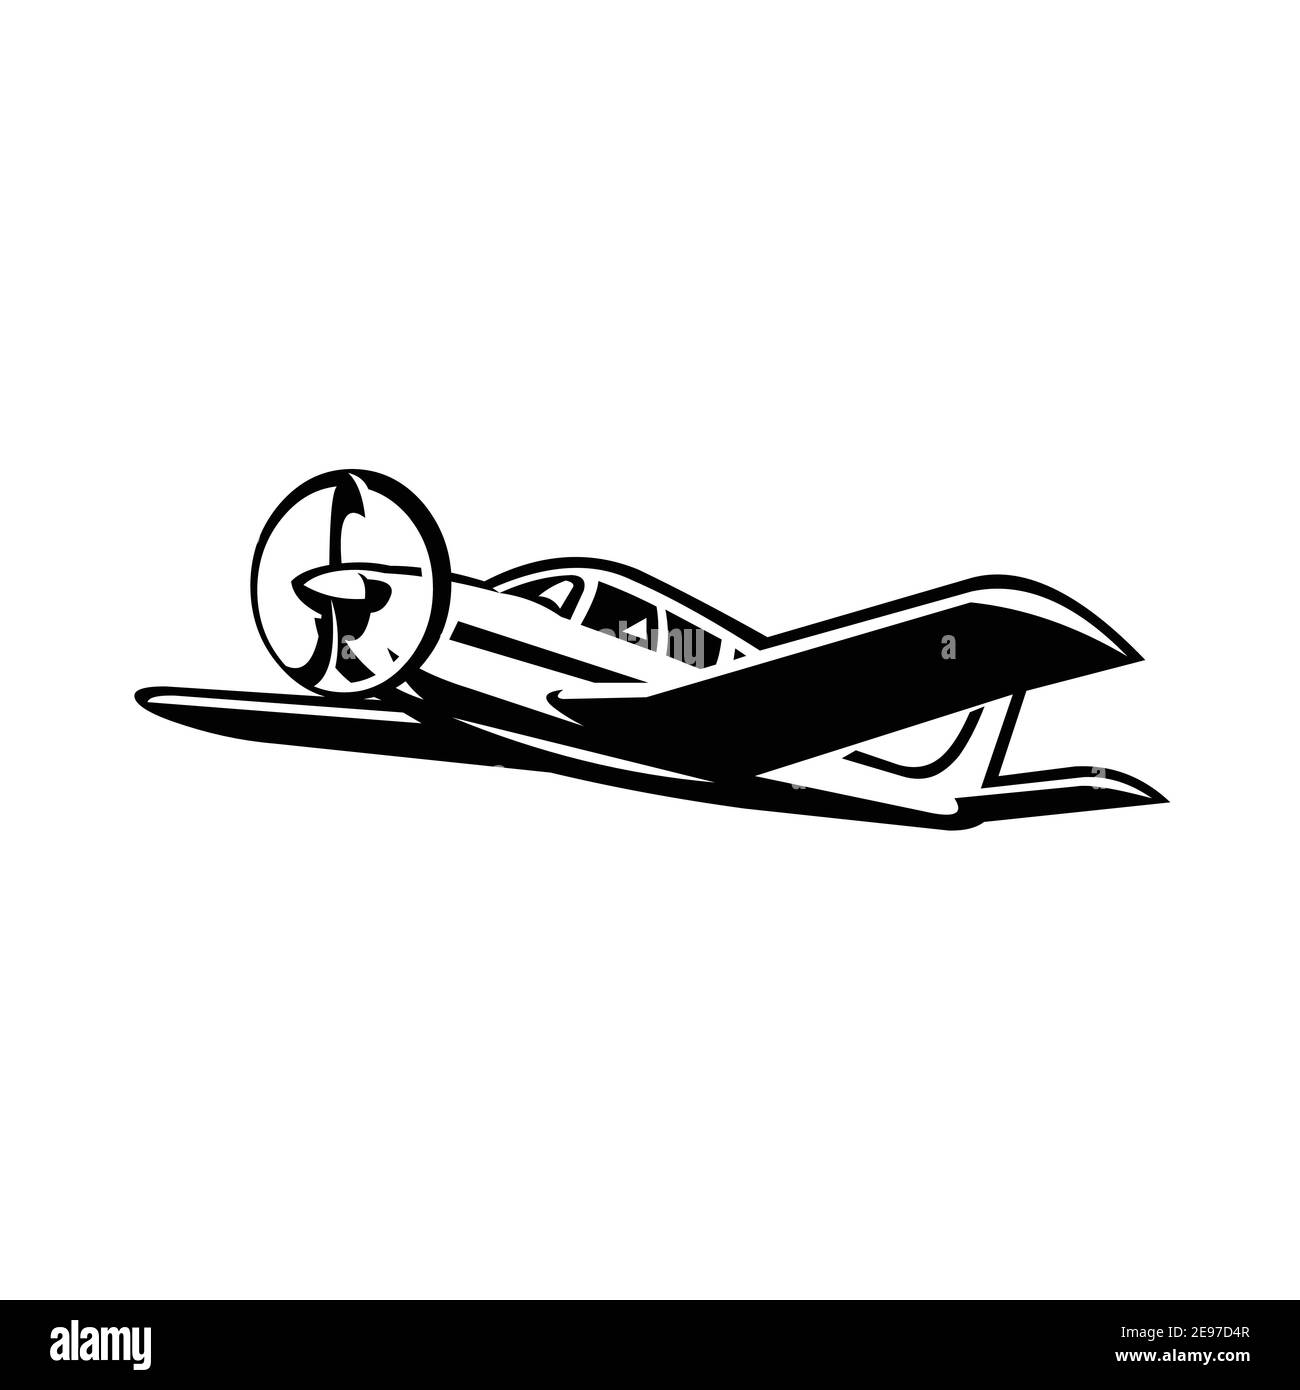 Private plane, small propeller plane vector isolated Stock Vector